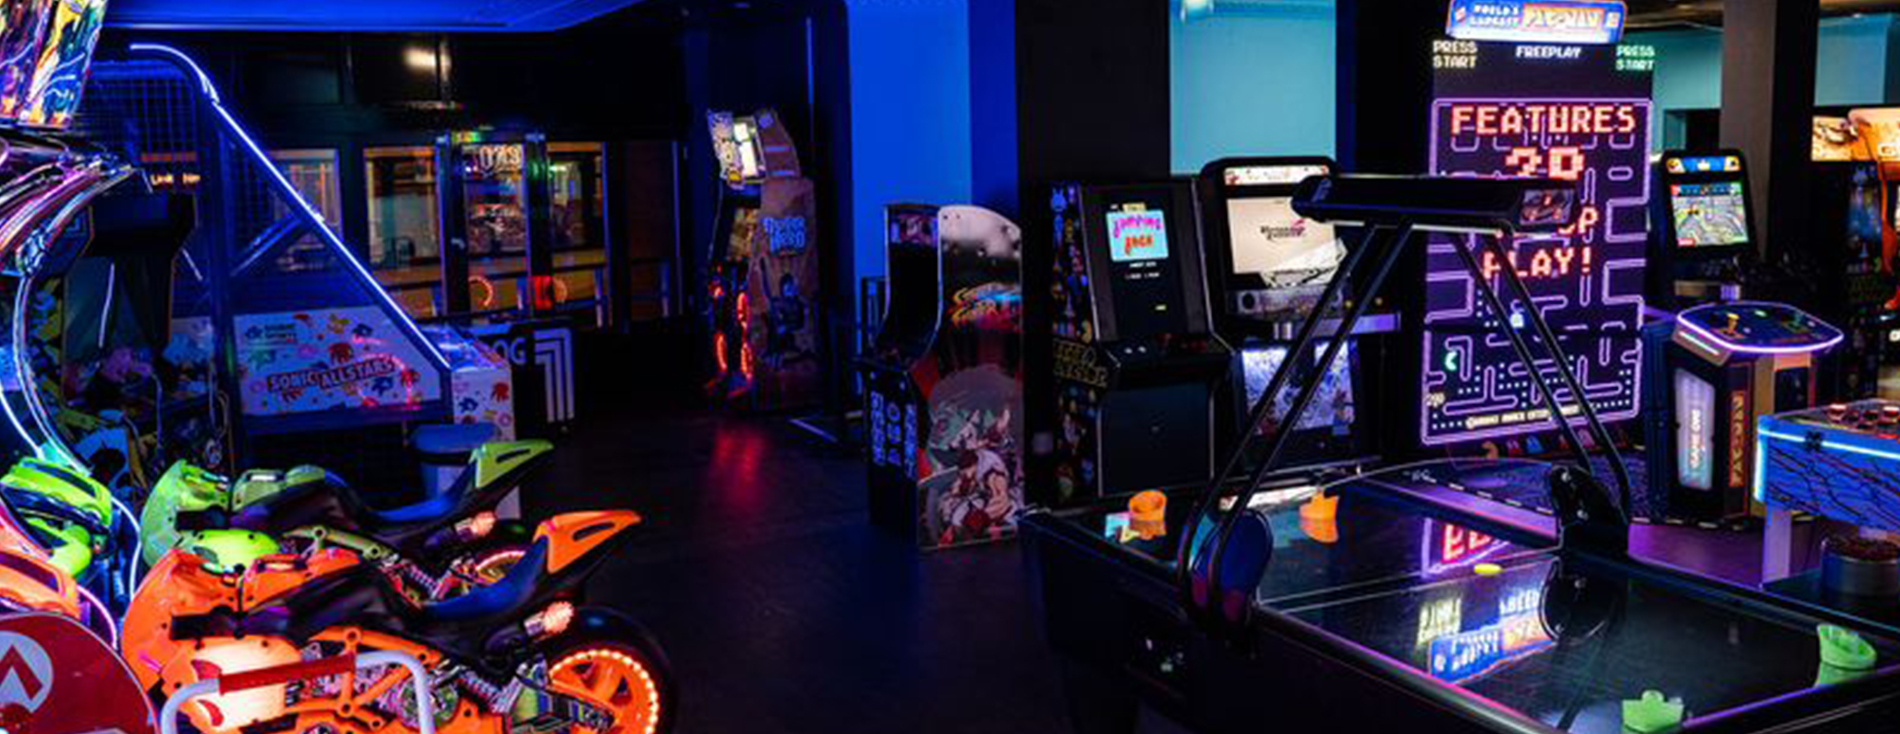 High Score Arcades Newbury available for hire